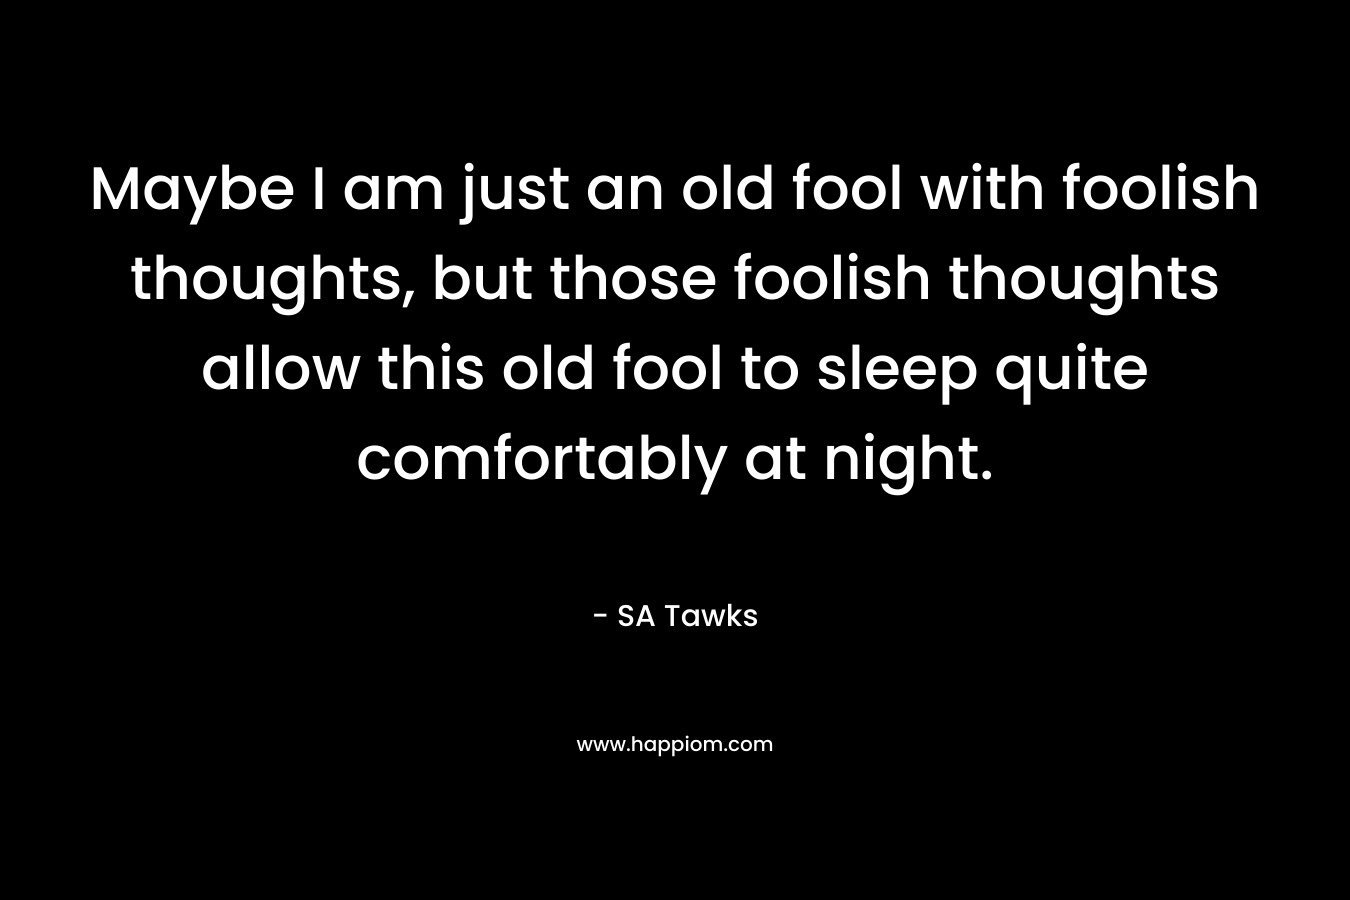 Maybe I am just an old fool with foolish thoughts, but those foolish thoughts allow this old fool to sleep quite comfortably at night.